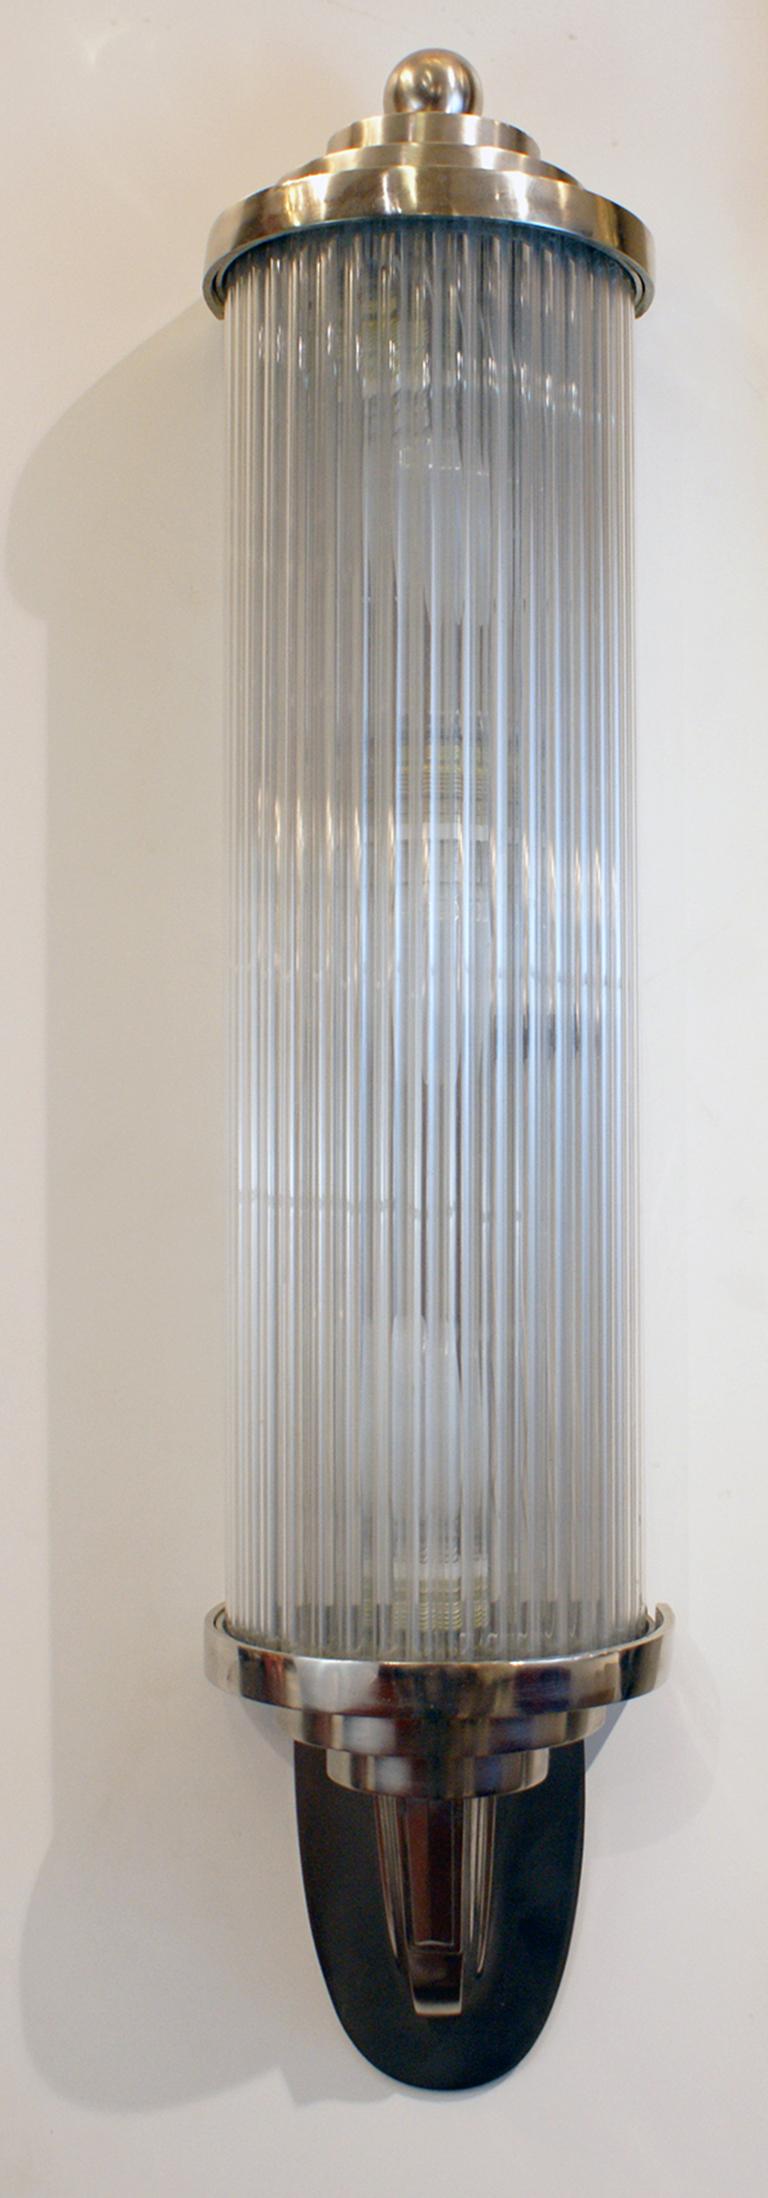 Pair of modernist French Art Deco wall lights, featuring long solid clear glass tubular rods that forms a semi-cylinder shape, held by nickel plated bronze frame with geometric design. Can be hang in vertical or horizontal position.
Having three